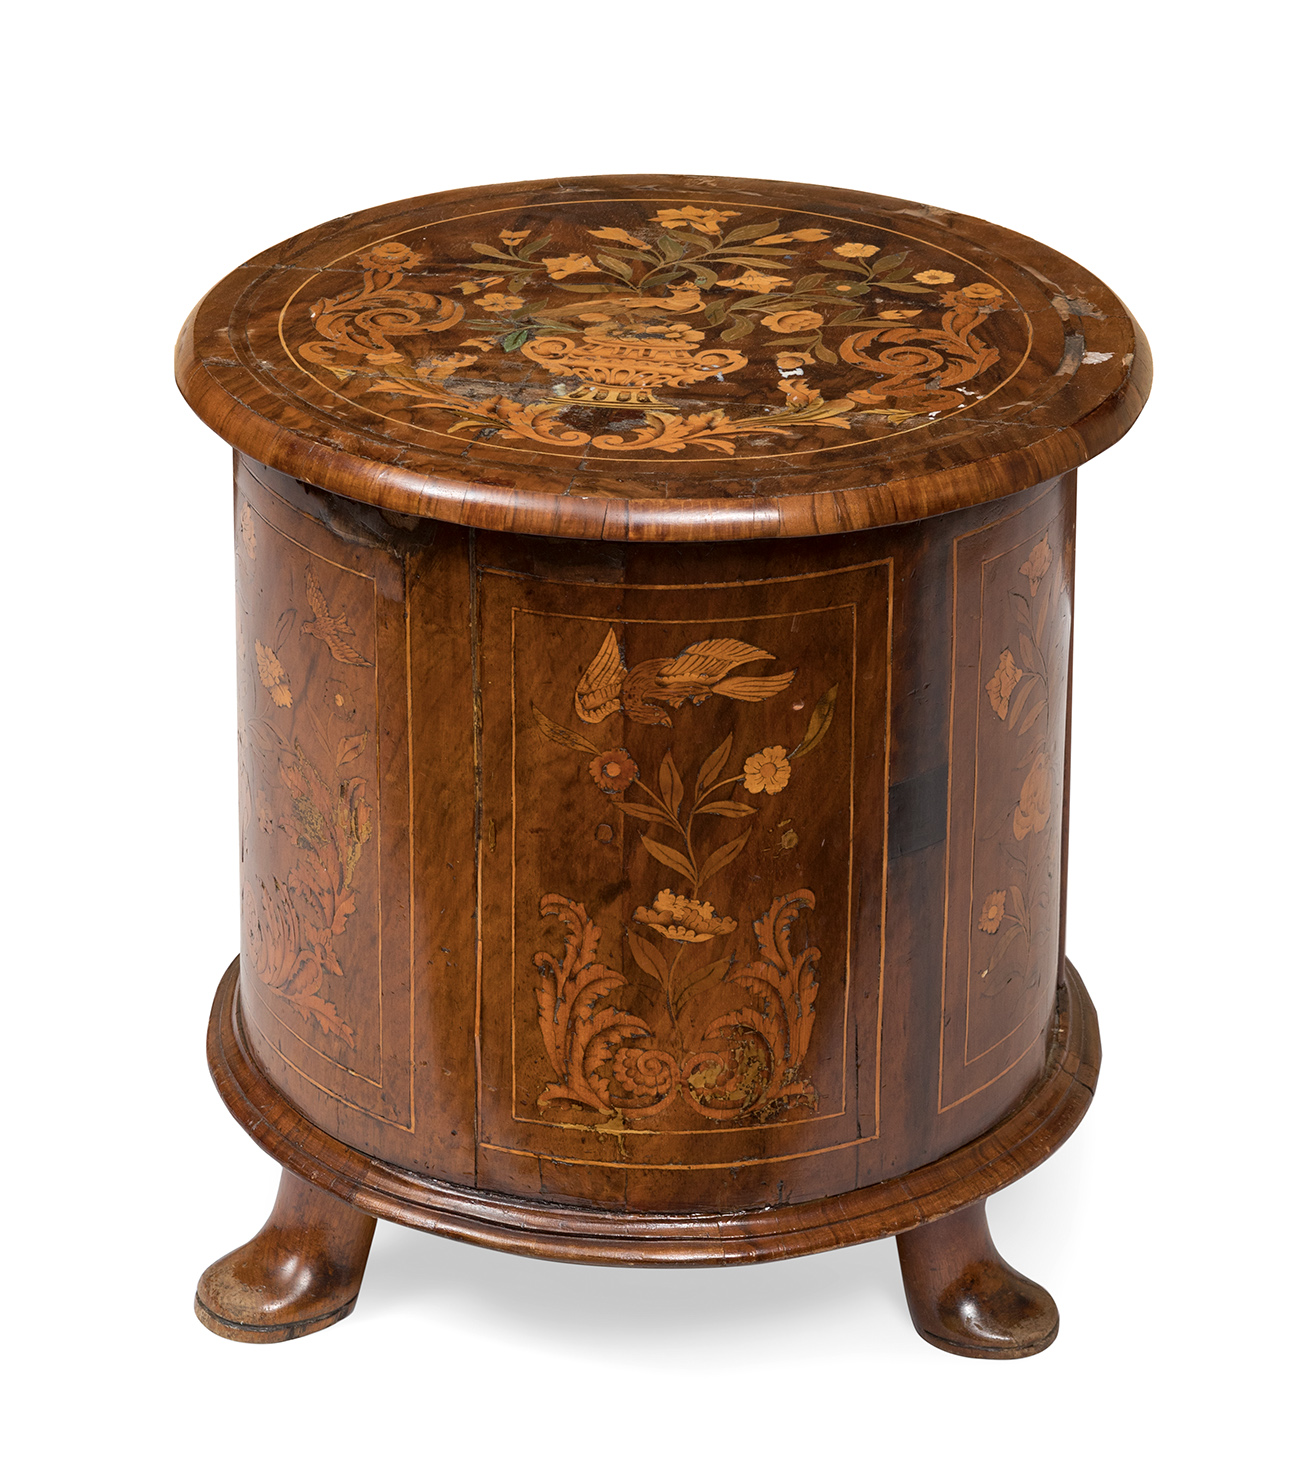 Planter with lid. Holland, 18th century.Marquetry.Lacking in the lid.Measurements: 45 x 41 x 41 cm.